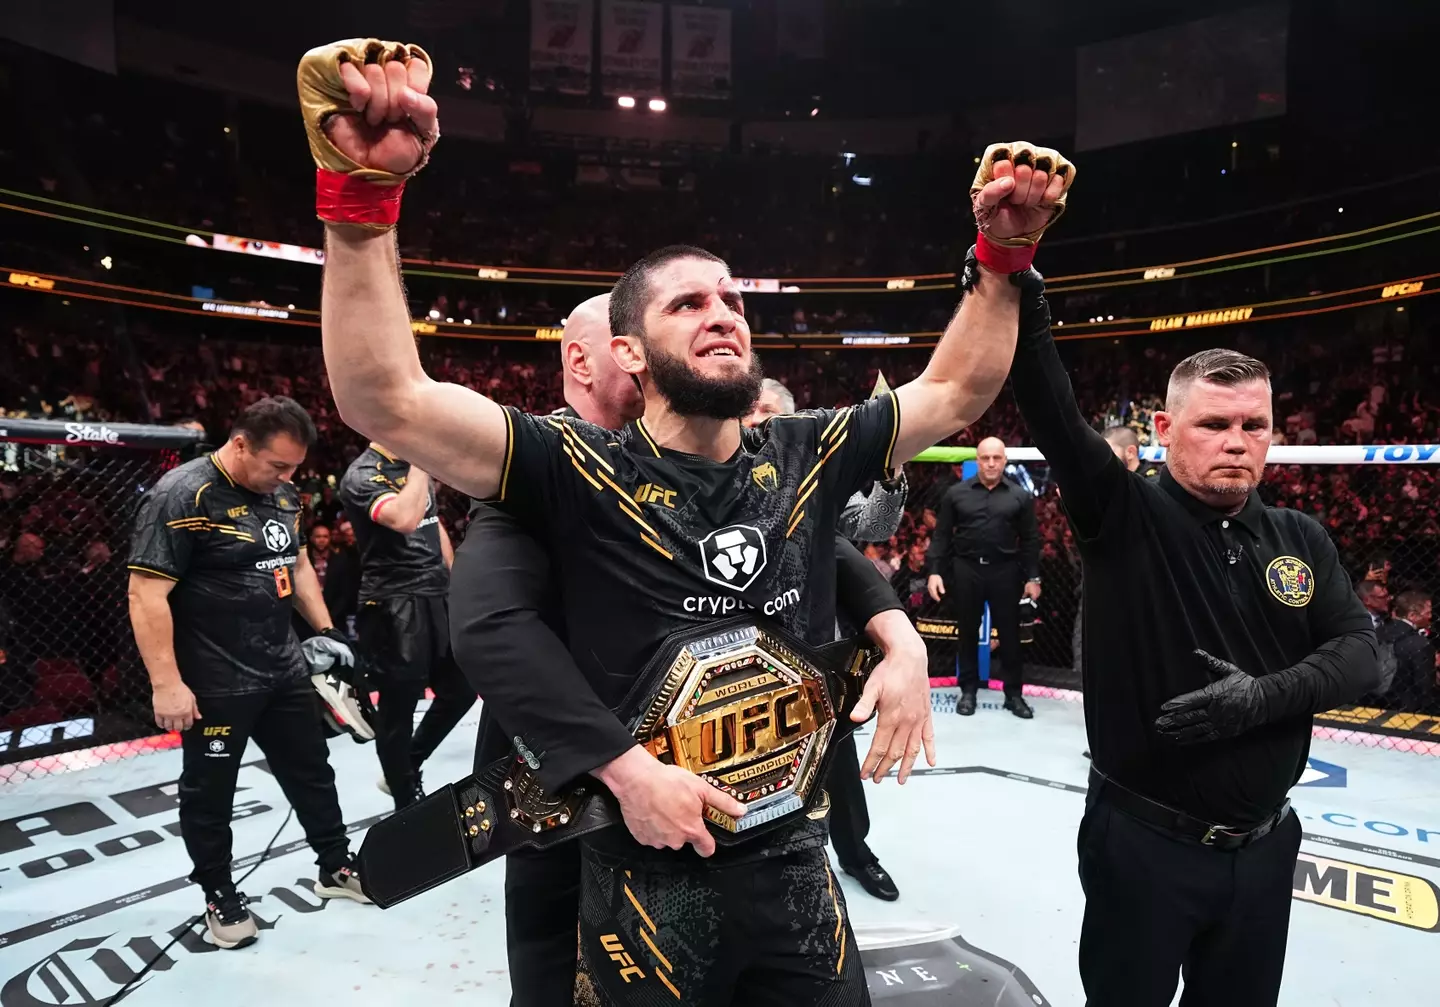 Dana White wraps the UFC title around Islam Makhachev following his win over Dustin Poirier. Image: Getty